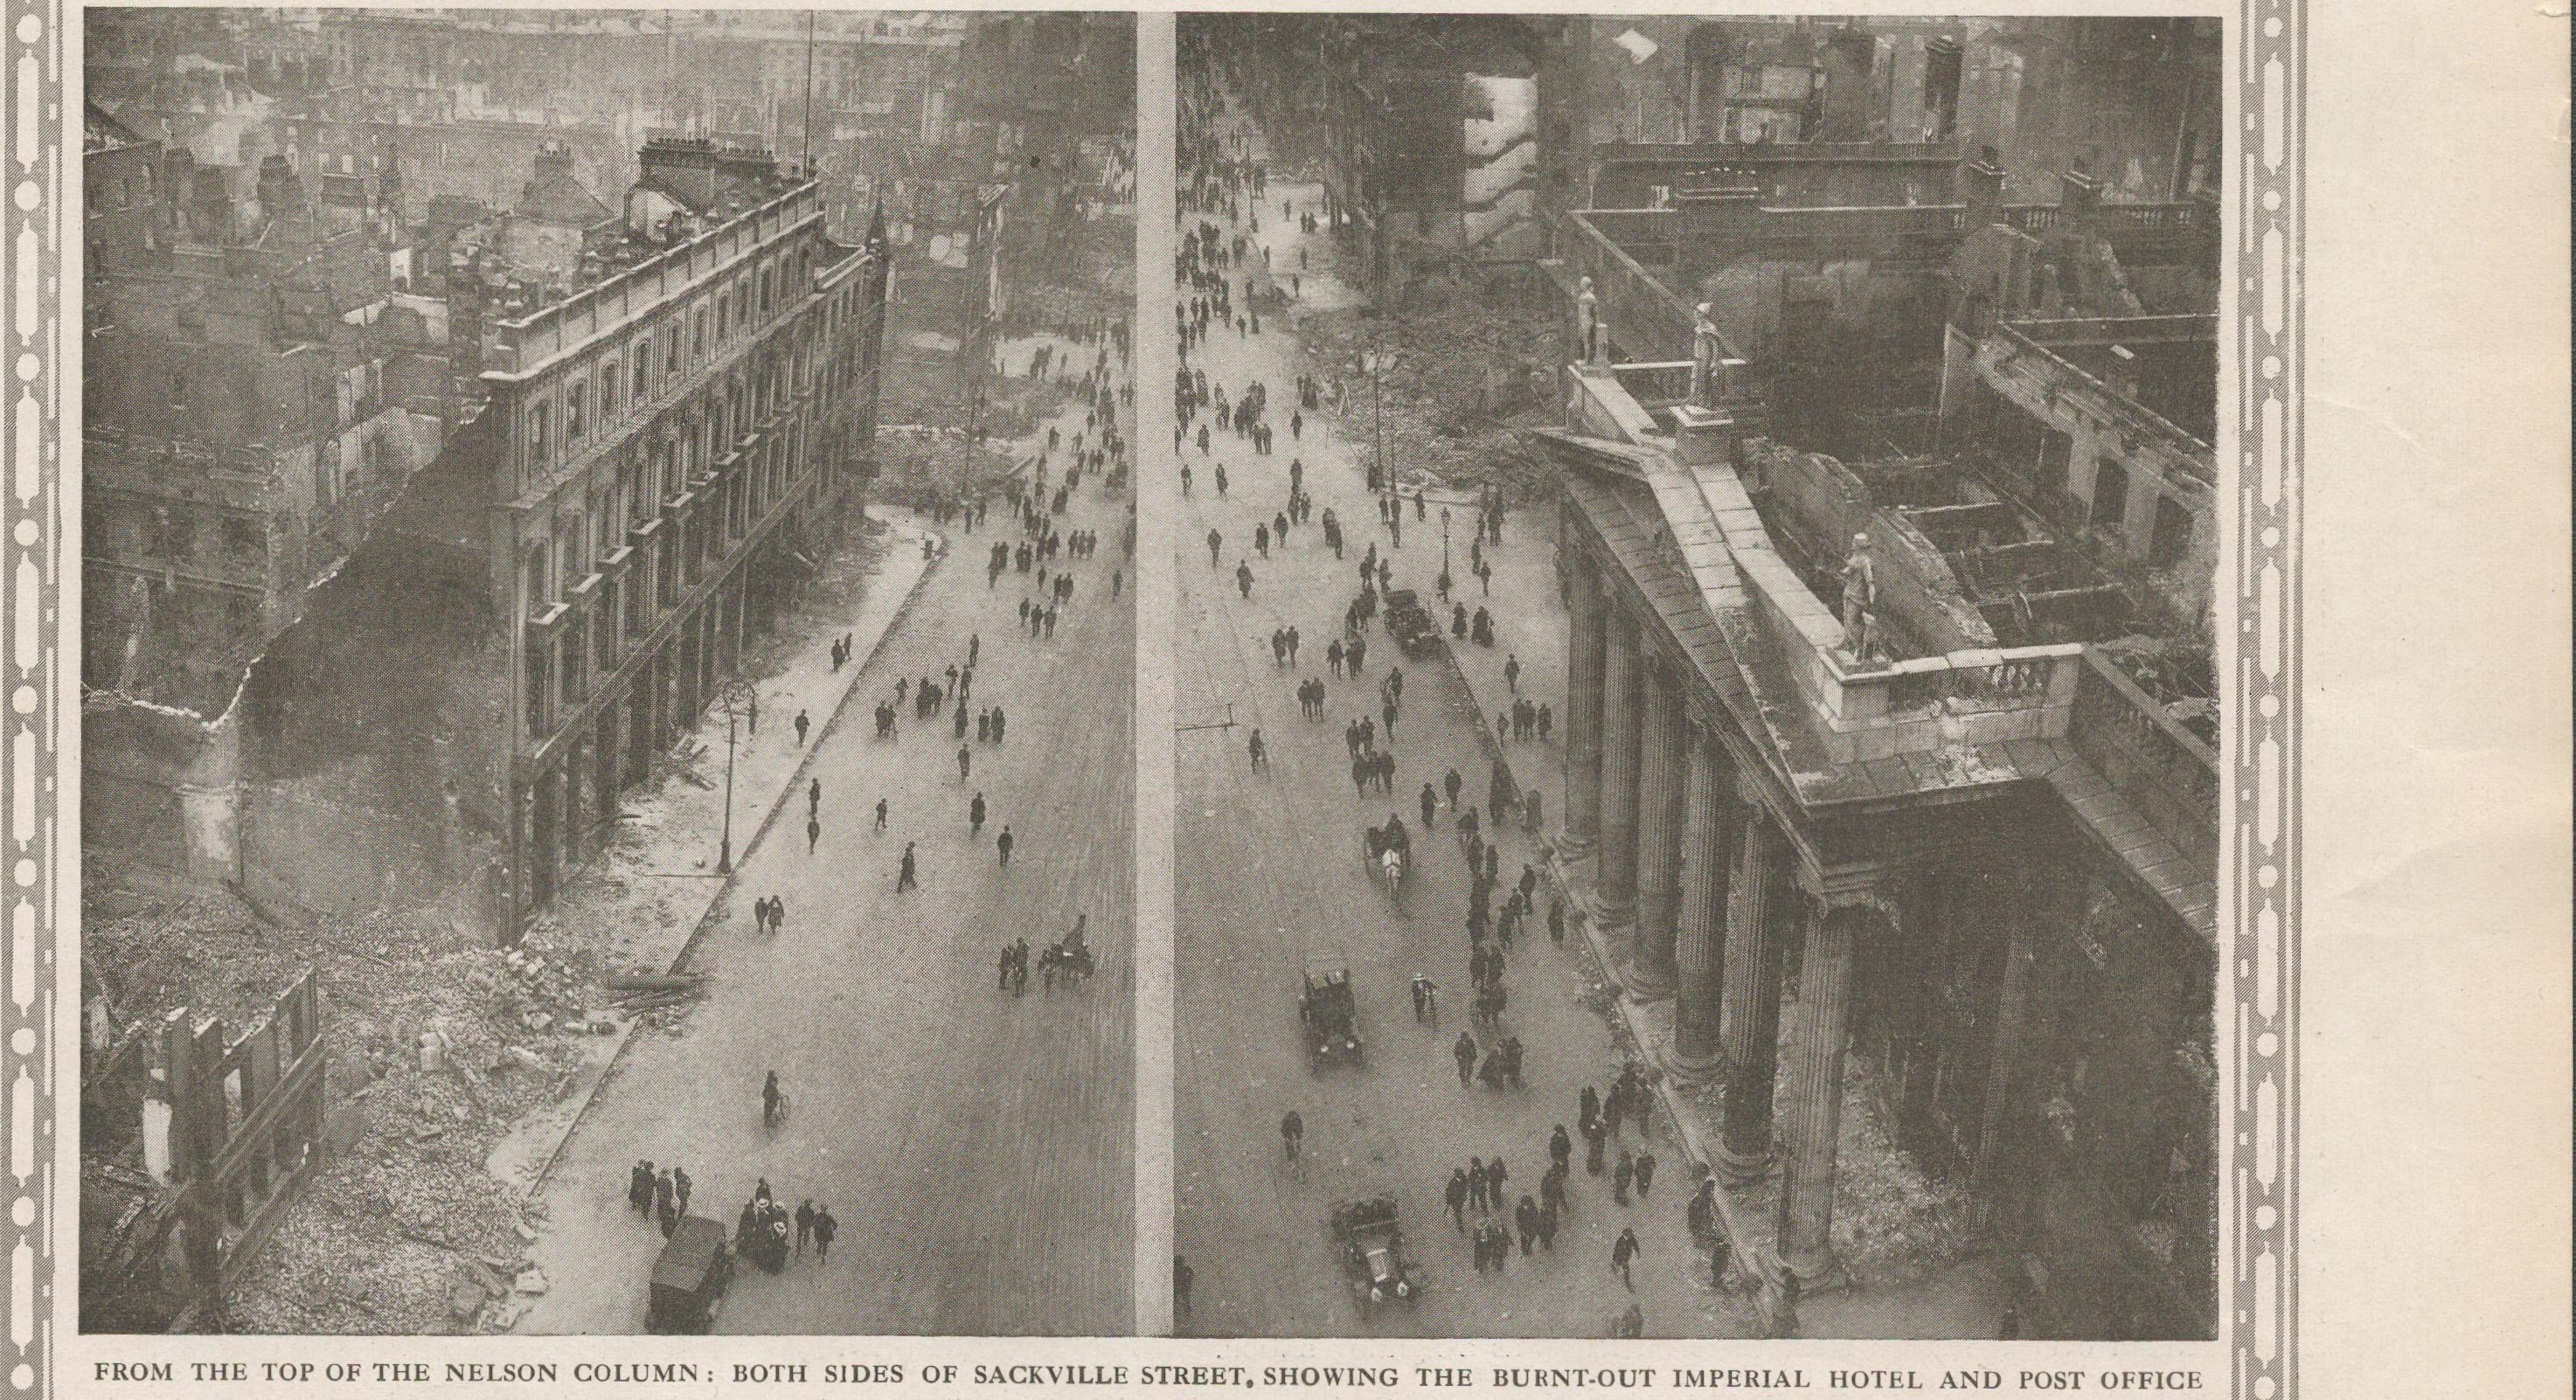 Original 1916 Page The Easter Rising Dublin In Ruins - Image 3 of 4